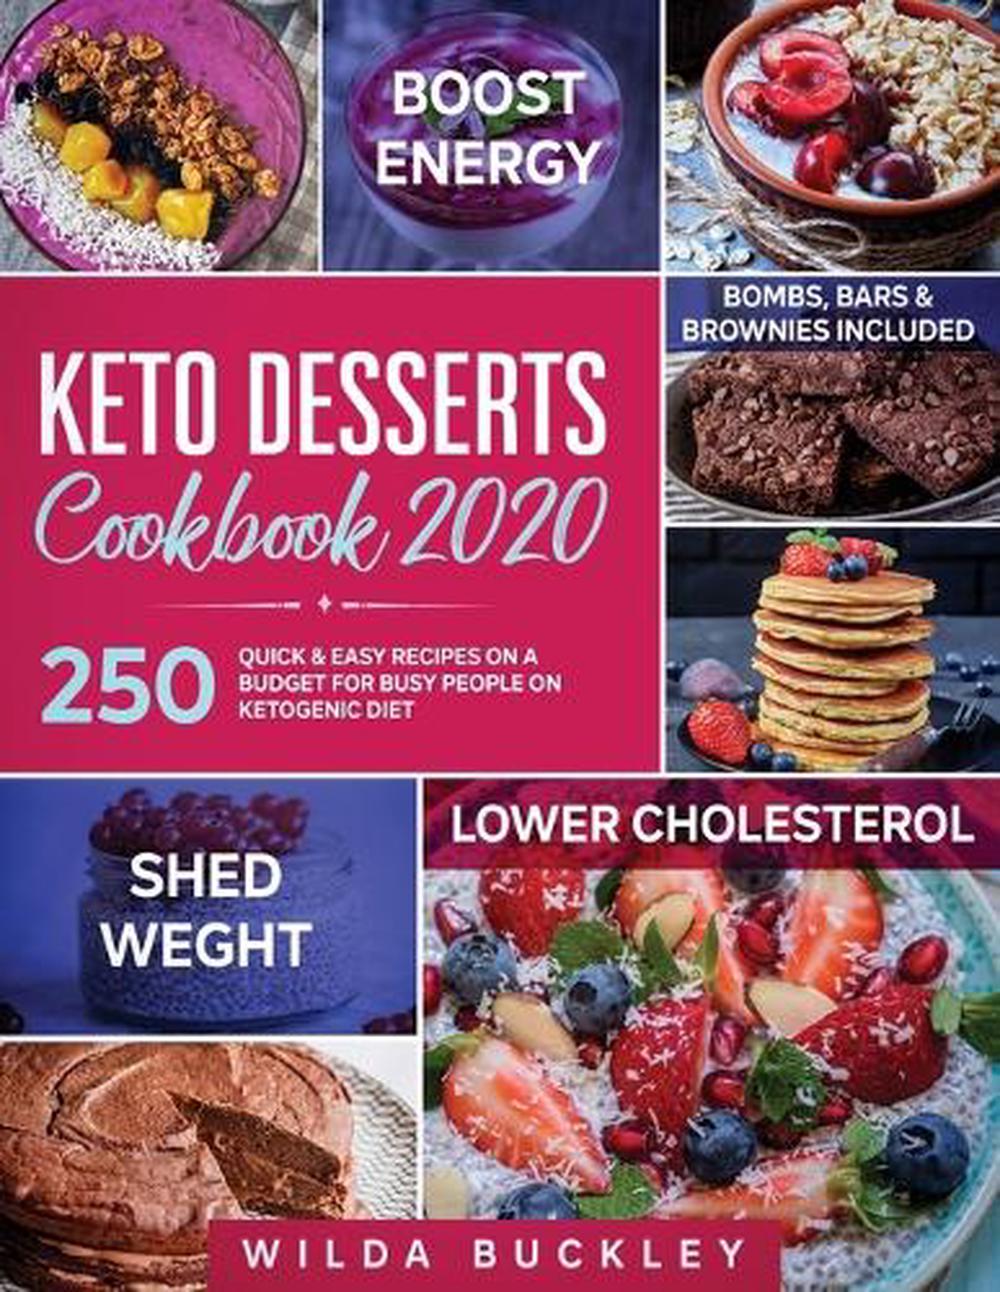 Keto Desserts Cookbook 2020 by Buckley (English) Paperback Book Free